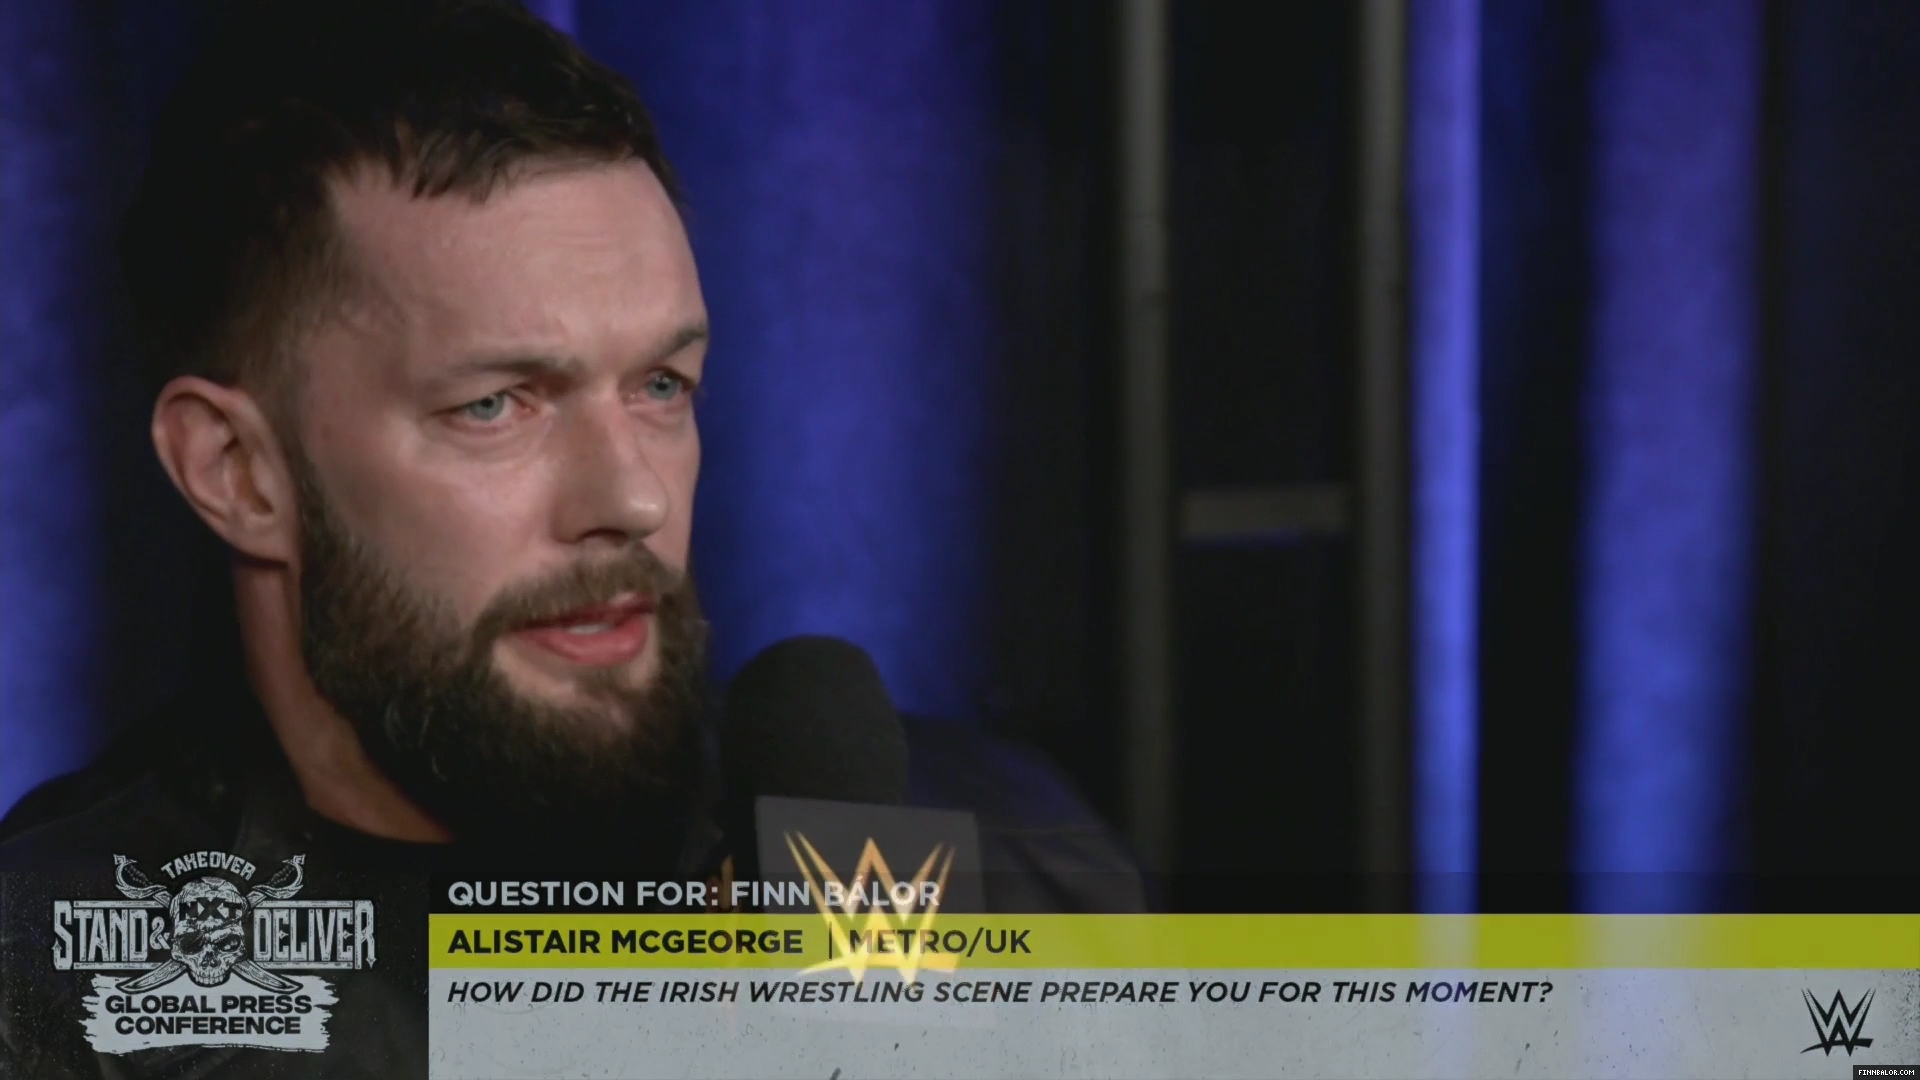 WWE_NXT_TakeOver_Stand_and_Deliver_2021_Global_Press_Conference_1080p_WEB_h264-HEEL_mp40950.jpg